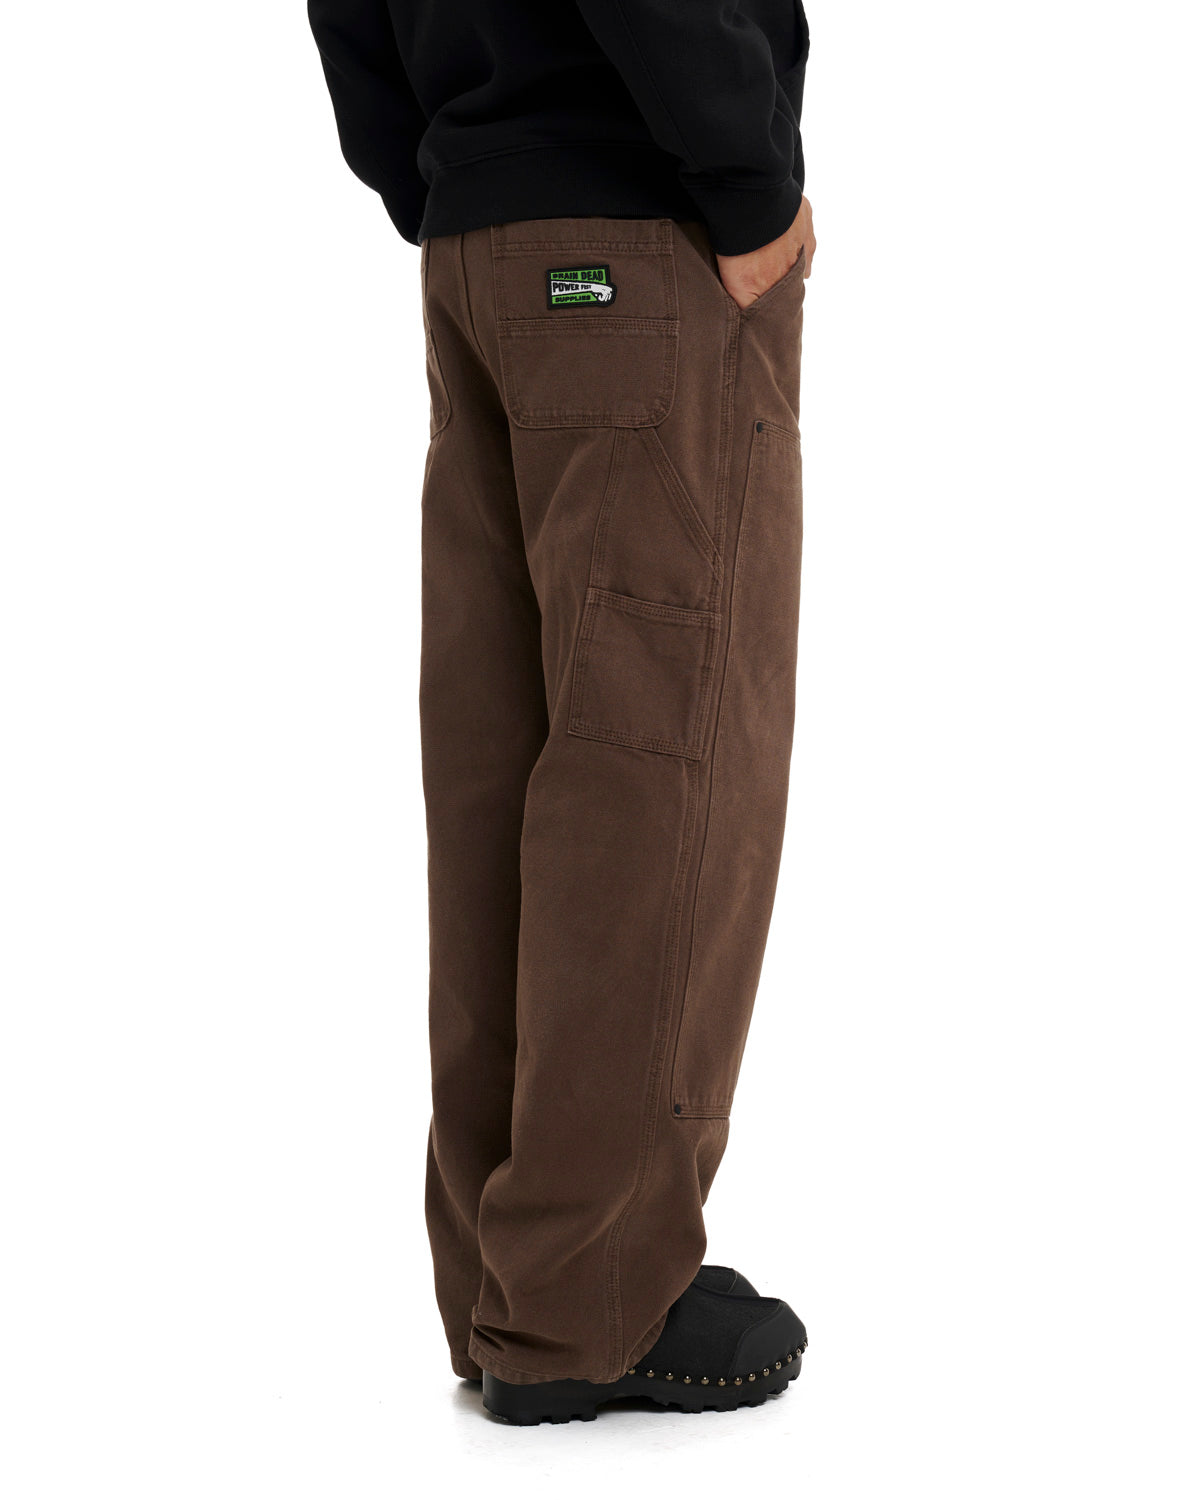 Double Knee Utility Pant - Brown